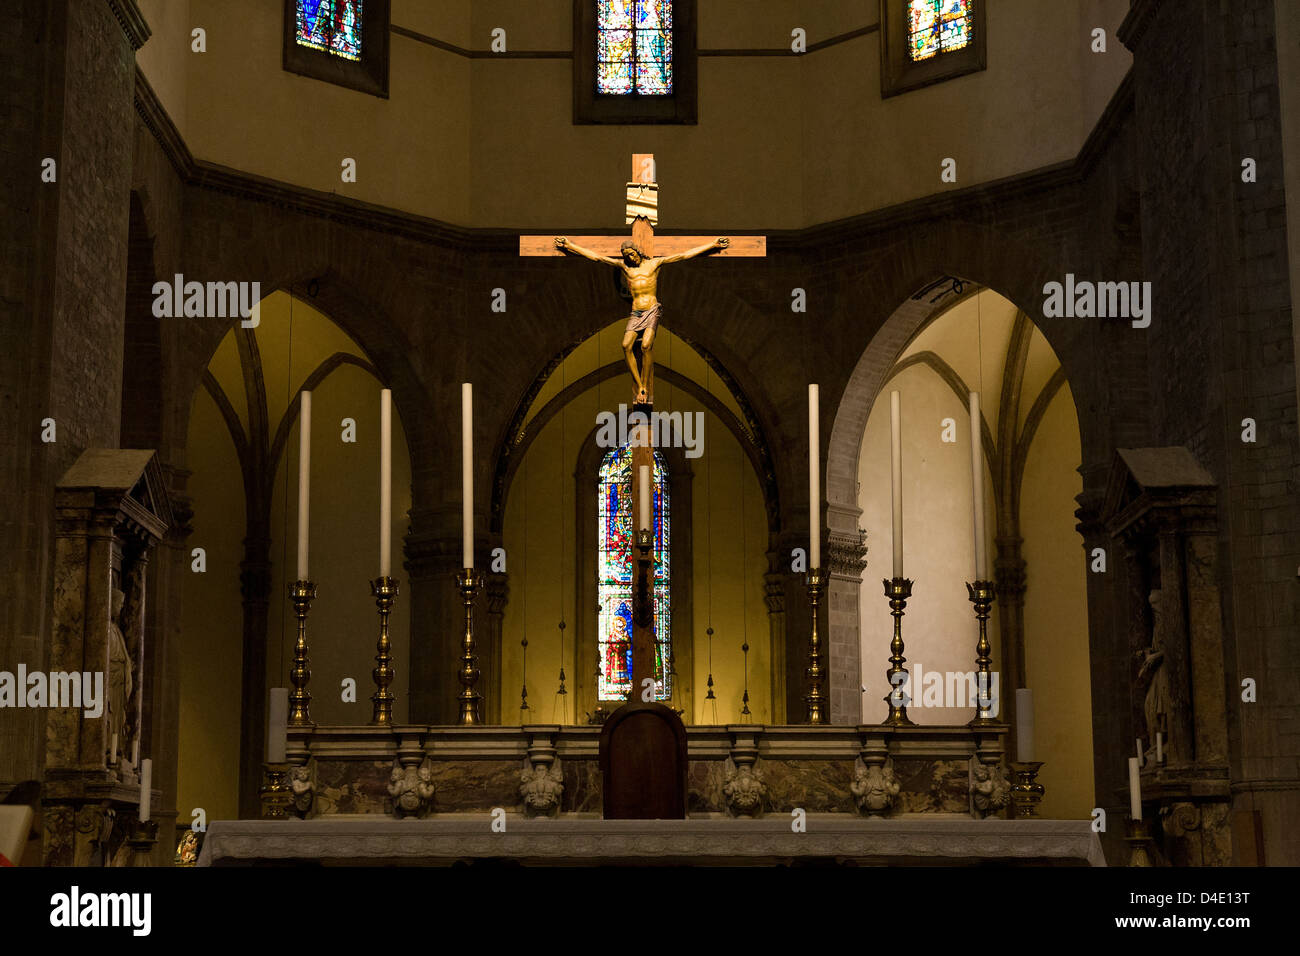 Interior of the Duomo, Santa Maria del Fiore Florence, Italy.The altar and cross with six candles. Stock Photo